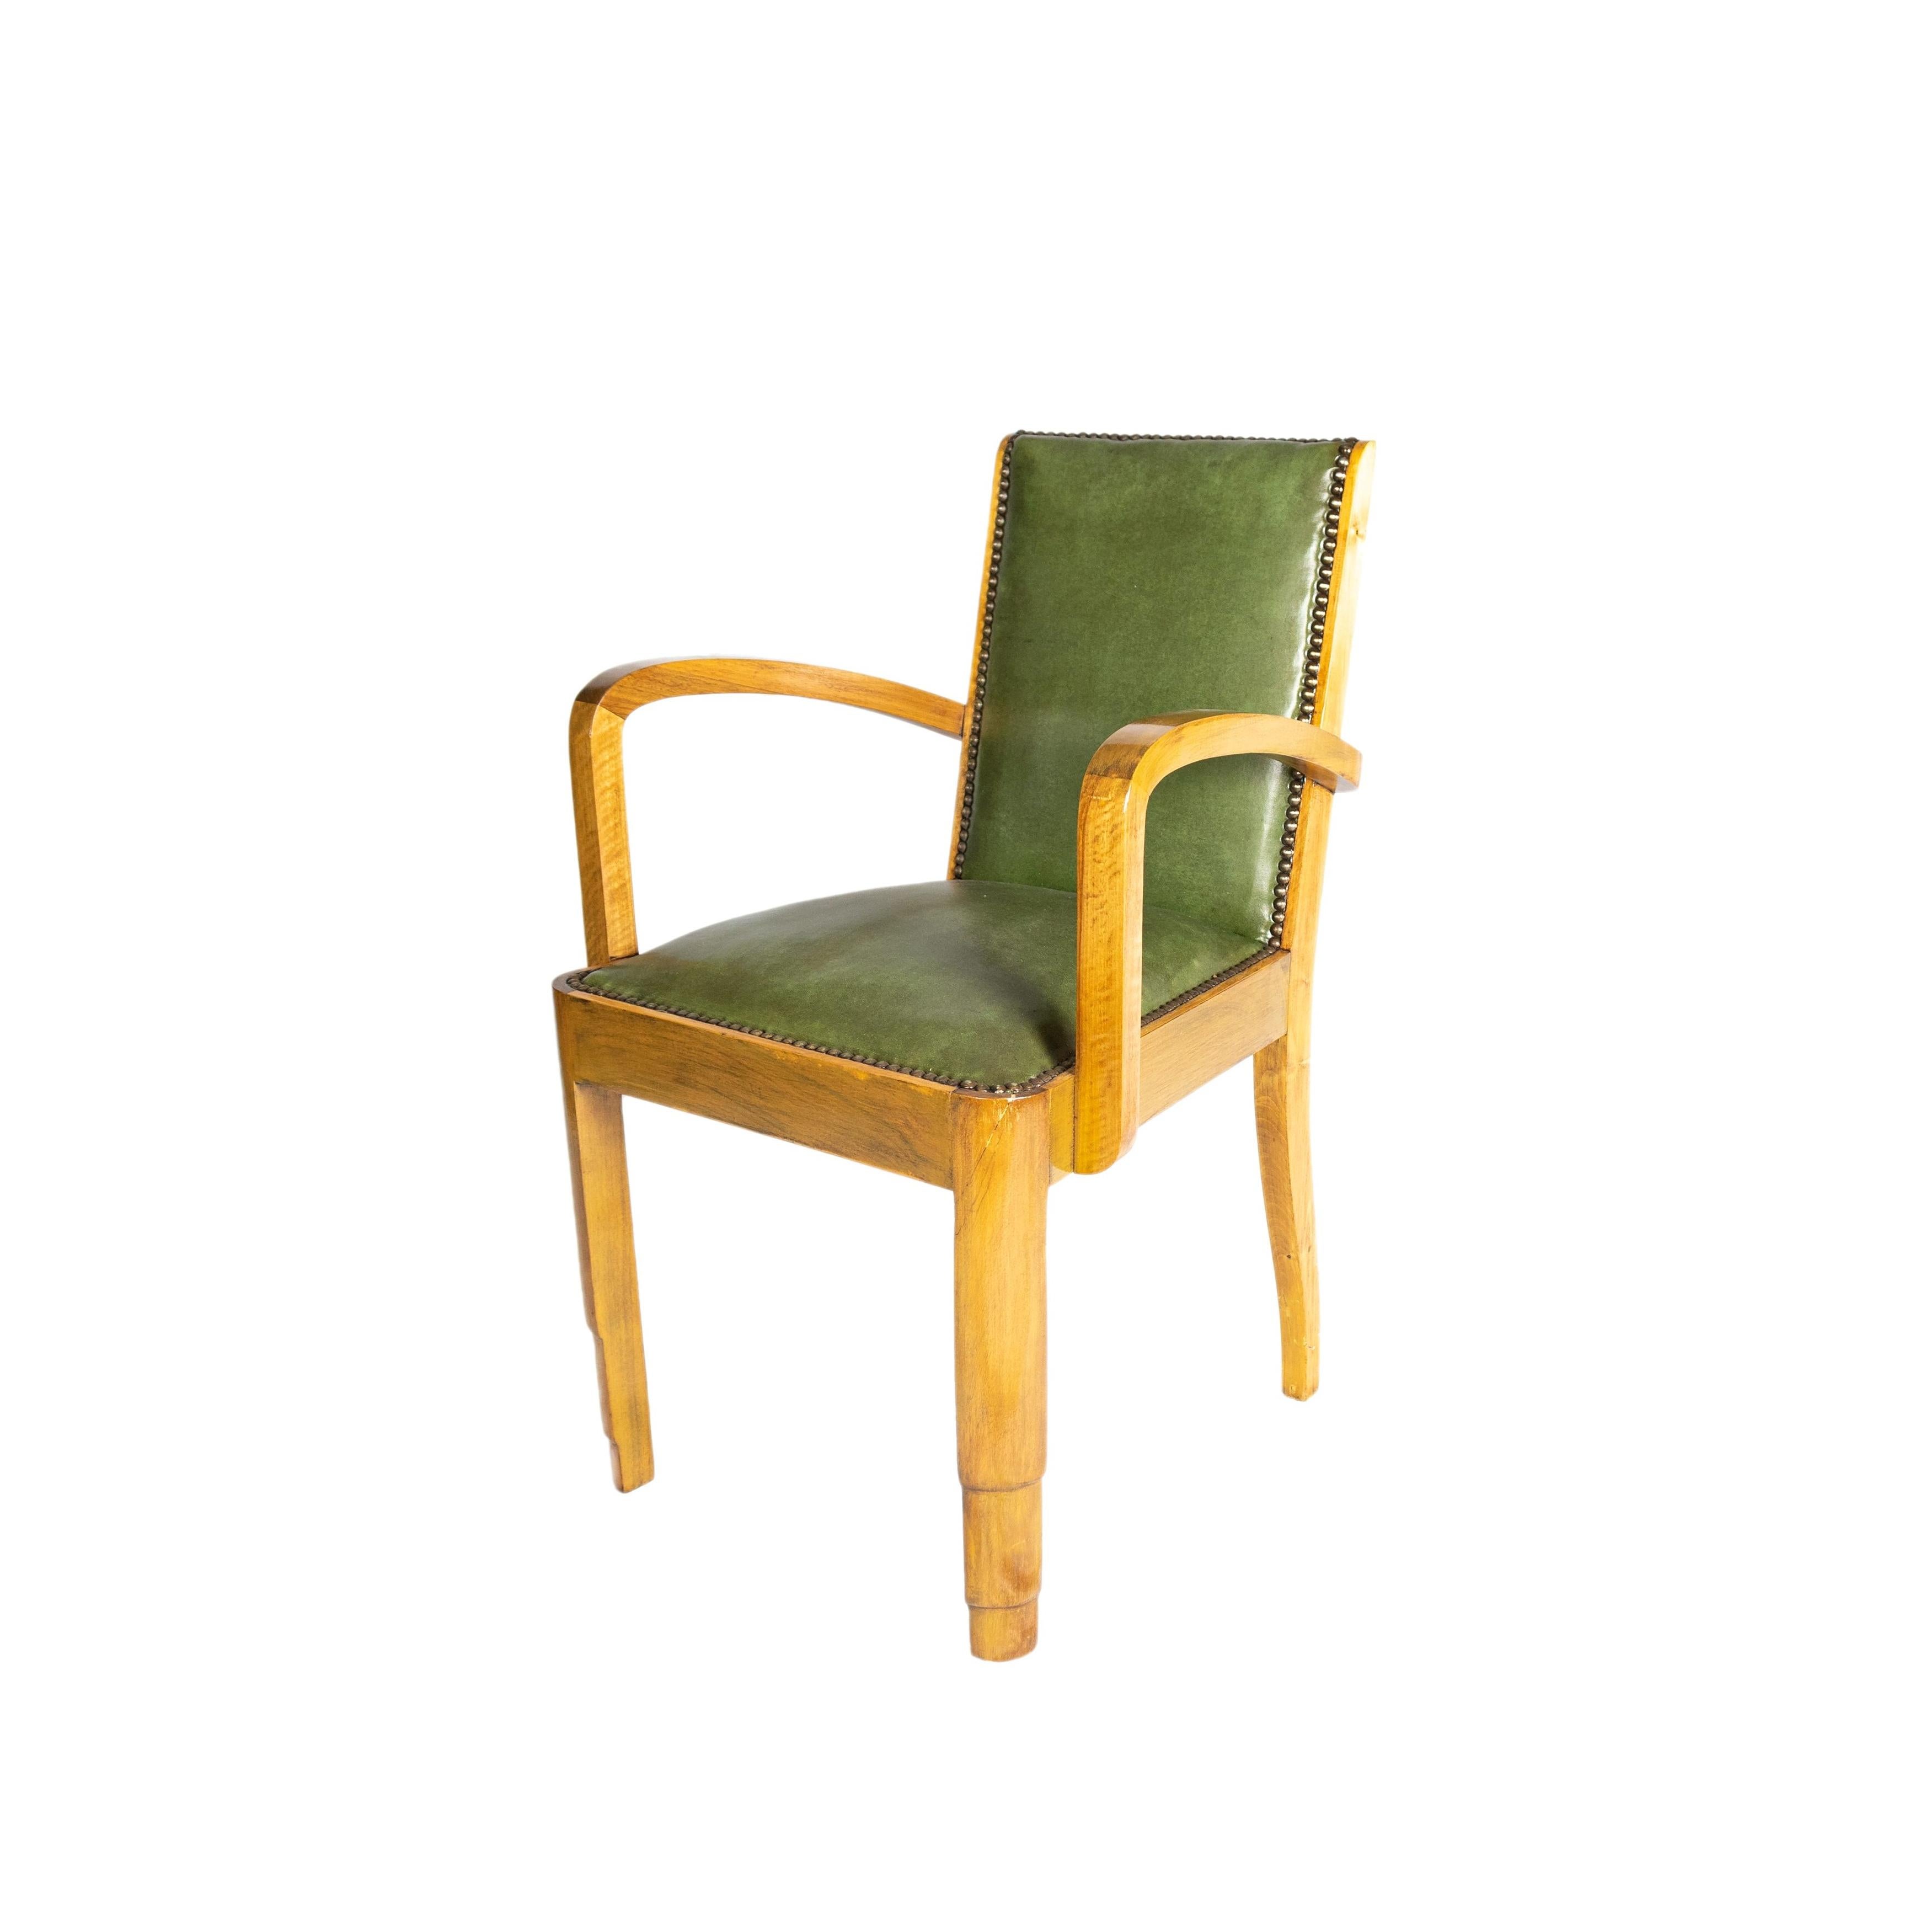 Set of 8 chairs in light veneer mahogany wood and upholstered in natural green leather and traditional studs.
Two chairs in the set with armrests, armchairs (see photos).
Solid chairs, structures reviewed by Carpenter.

Height: 33,07 in (84